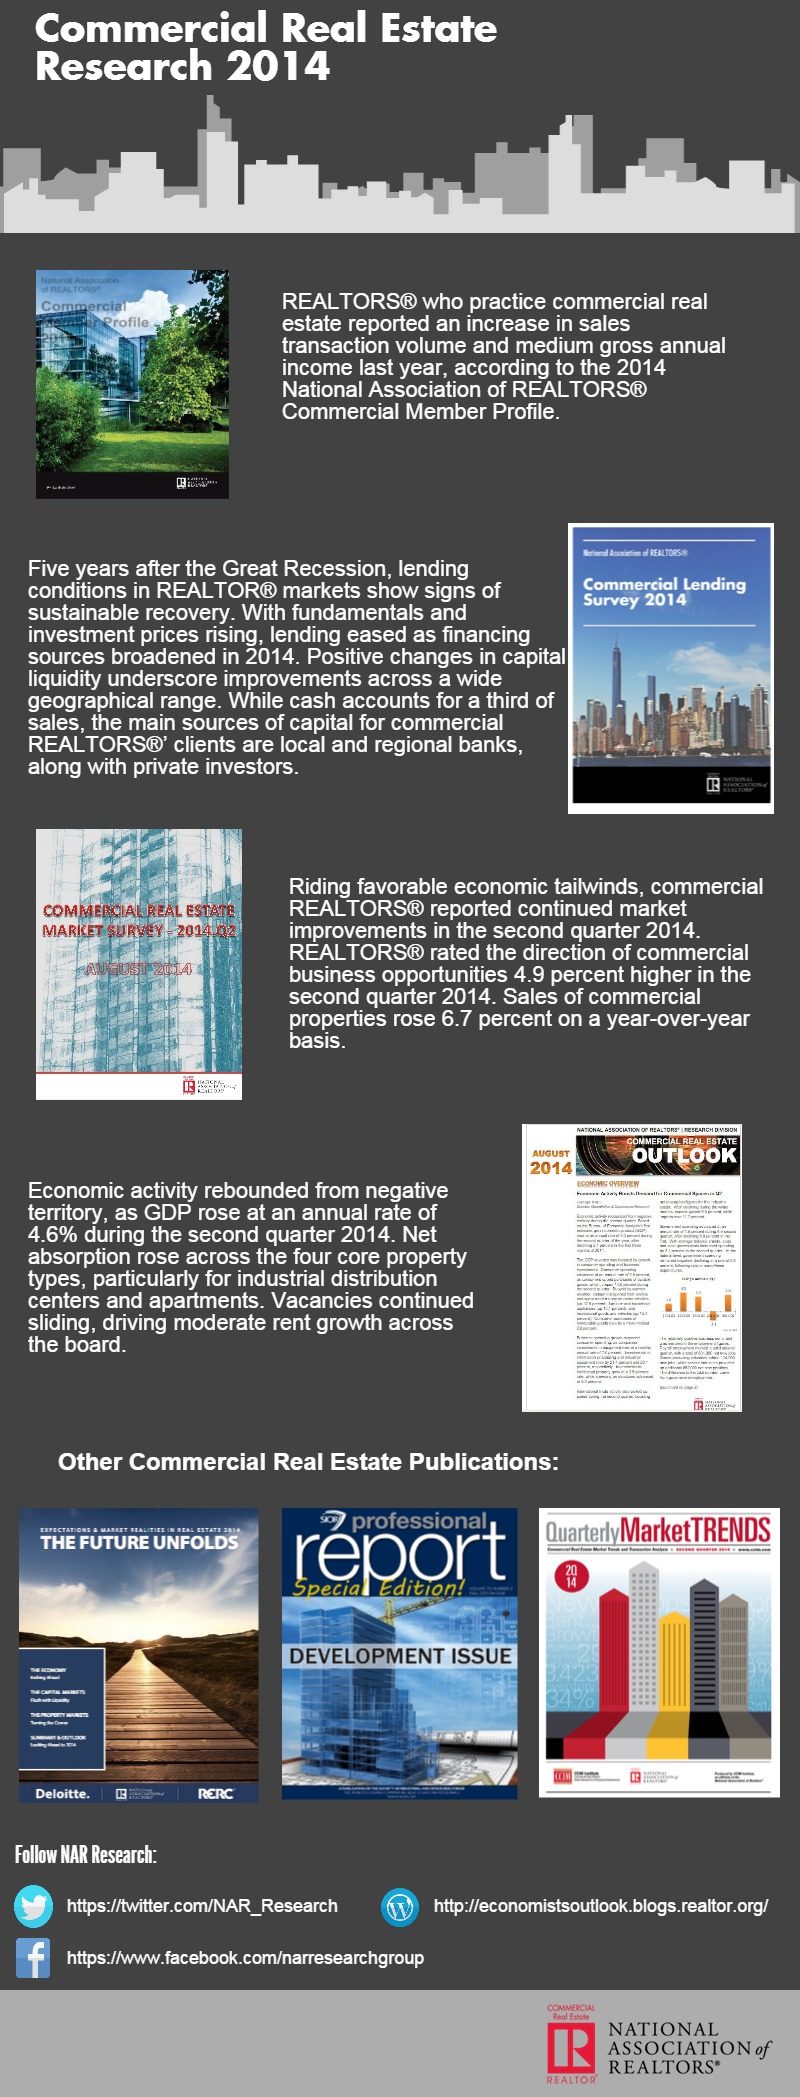 commercial real estate research